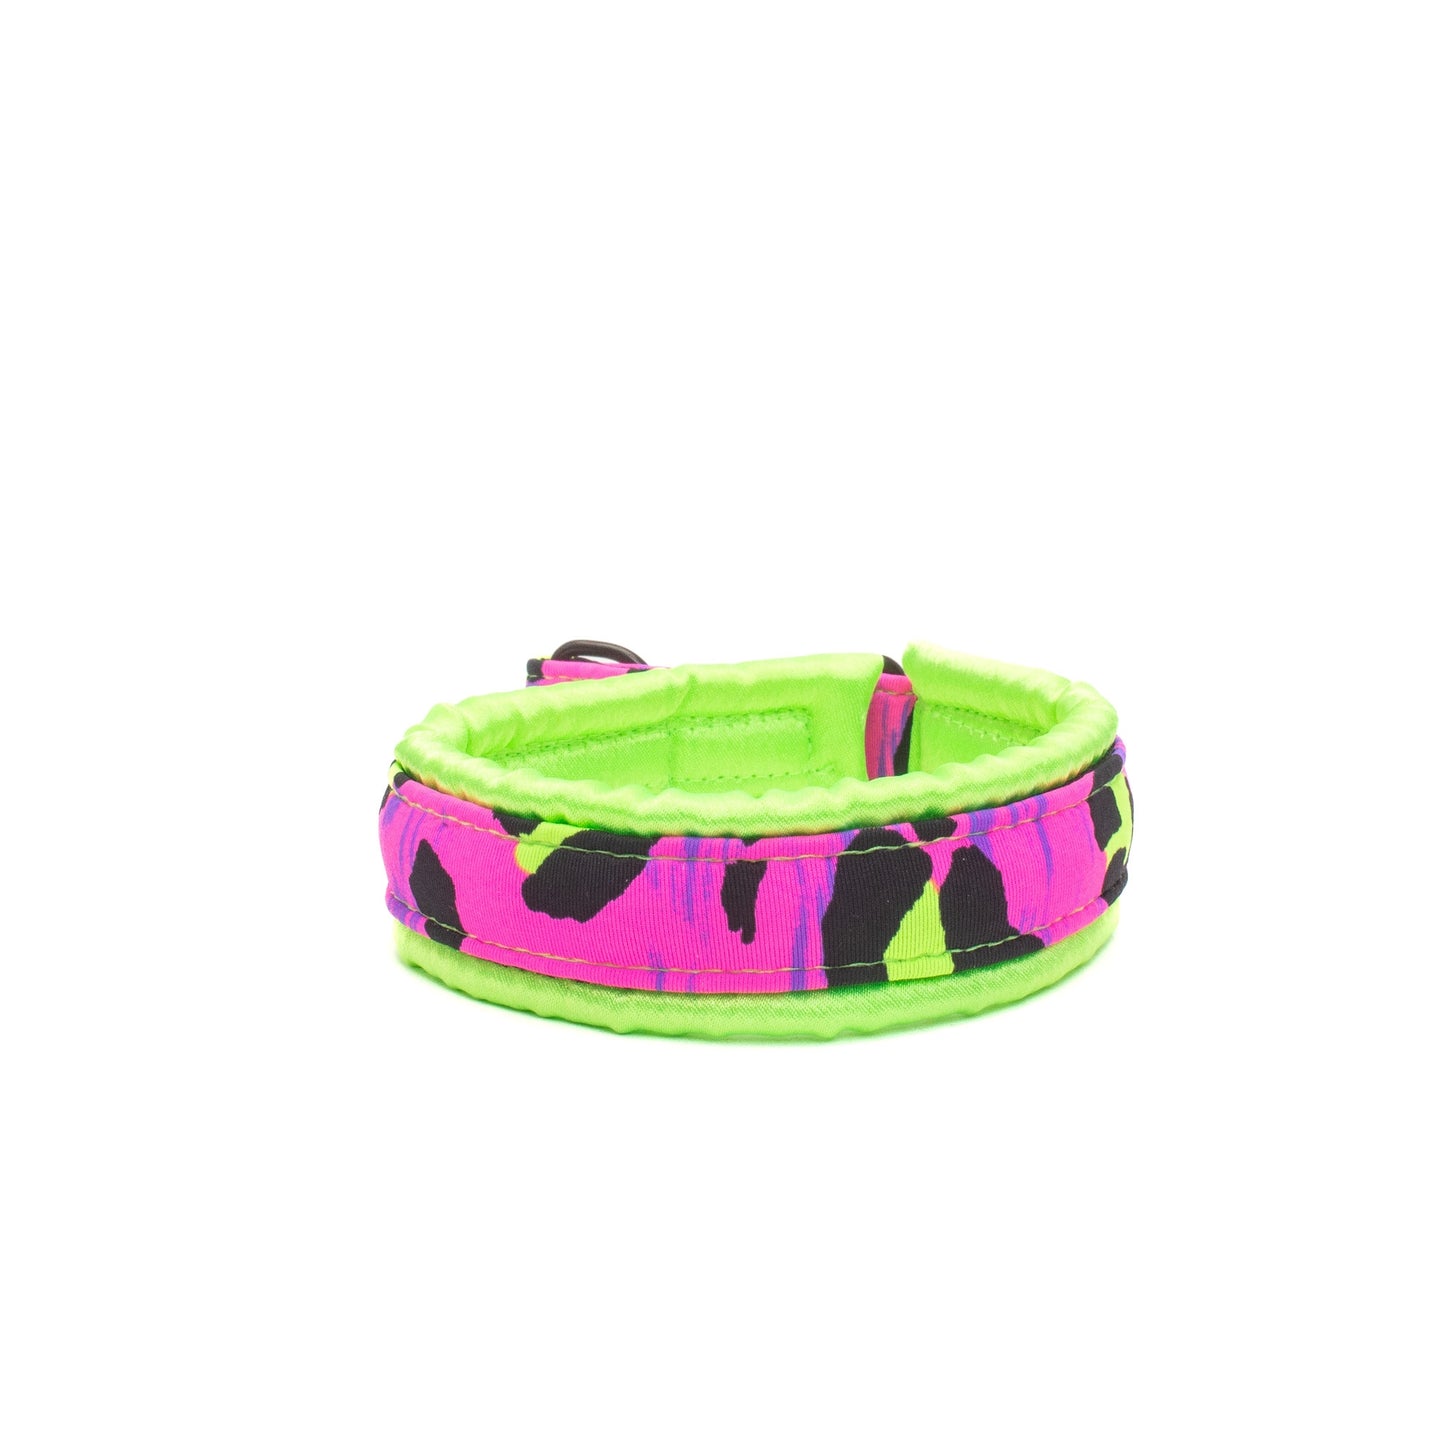 Small / Medium / Large Martingale Collar Poodle Supply Electric Lime Cheetah